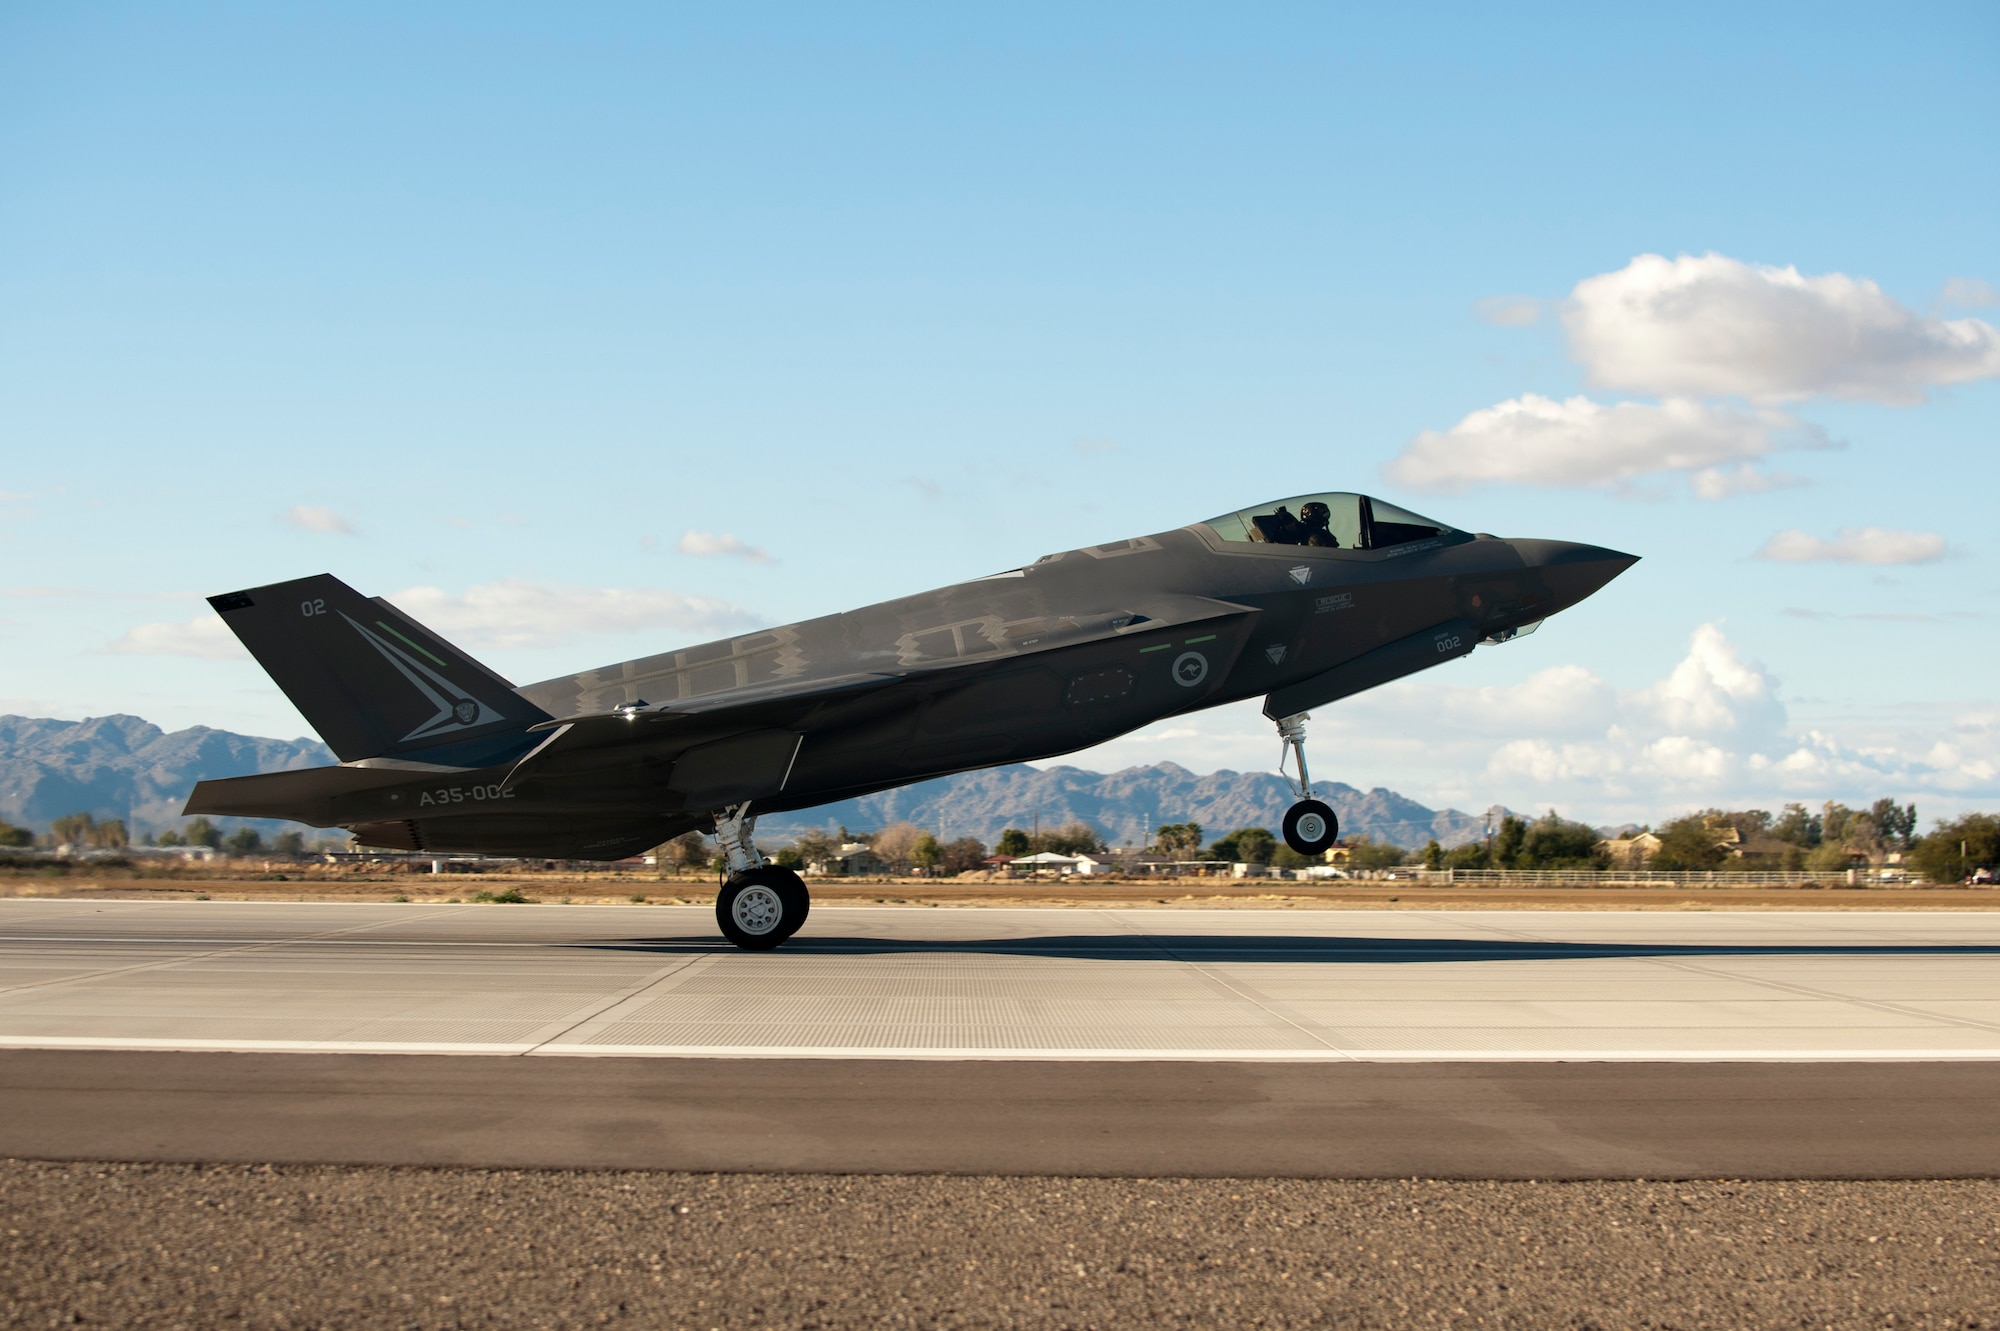 The first Royal Australian Air Force F-35A Lightning II jet arrived at Luke Air Force Base Dec. 18, 2014. The jet's arrival marks the first international partner F-35 to arrive for training at Luke. (U.S. Air Force photo by Staff Sgt. Staci Miller)
